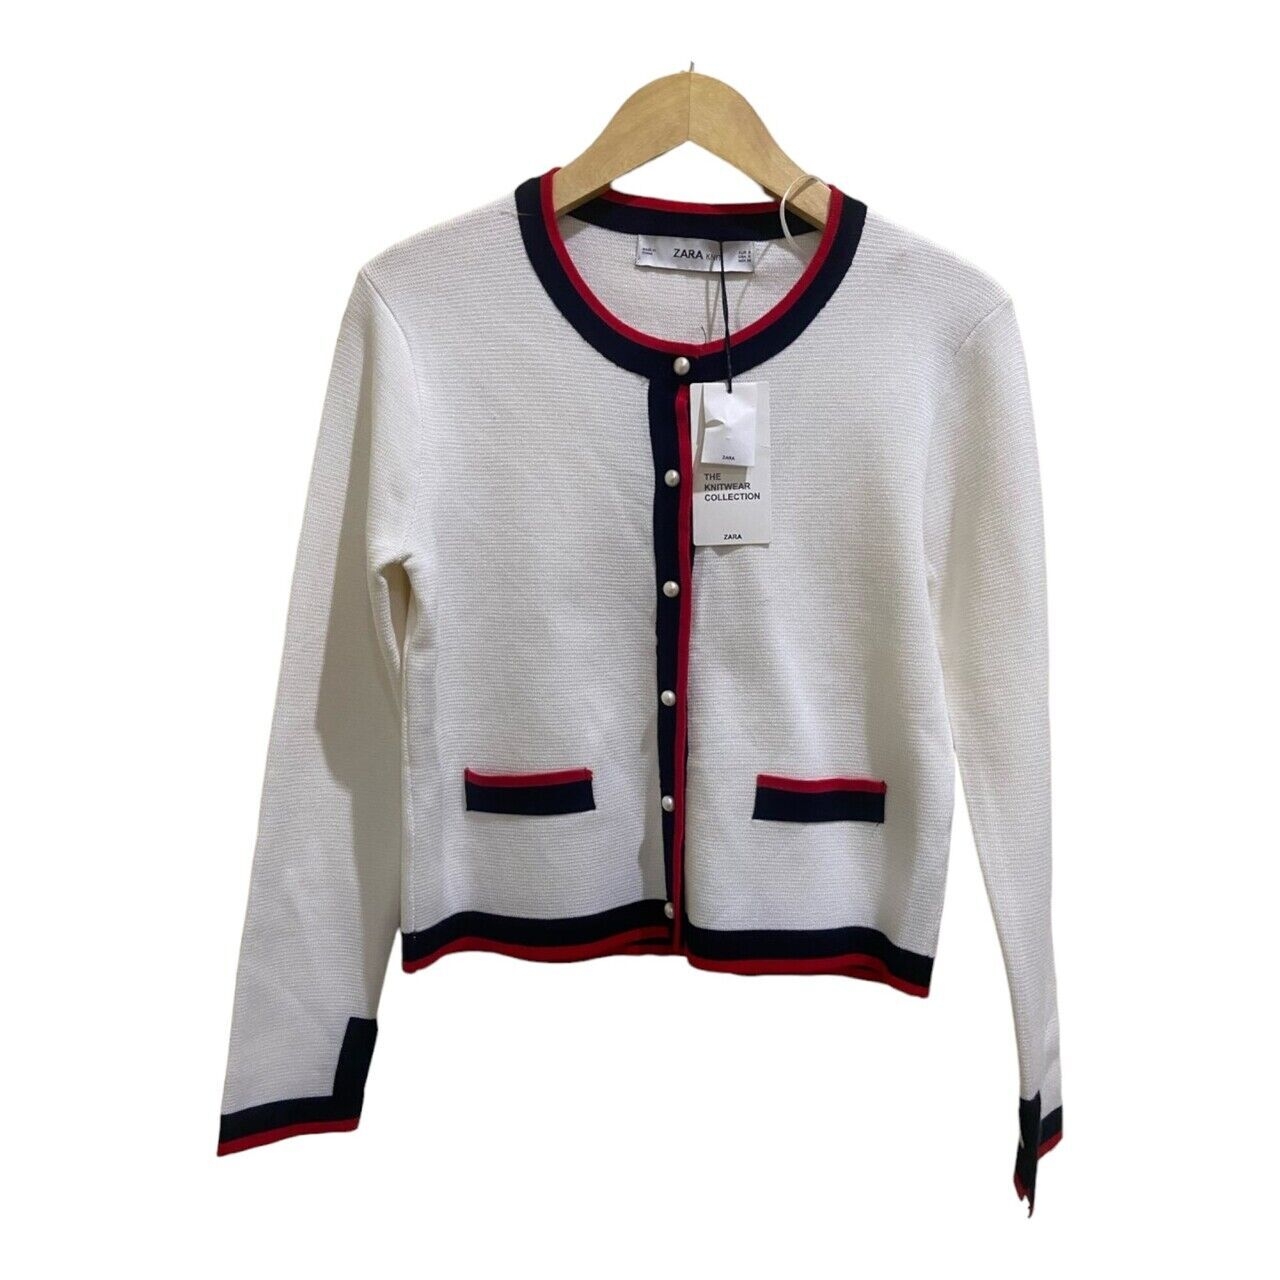 Zara Contrast Cardigan with Pearl Buttons